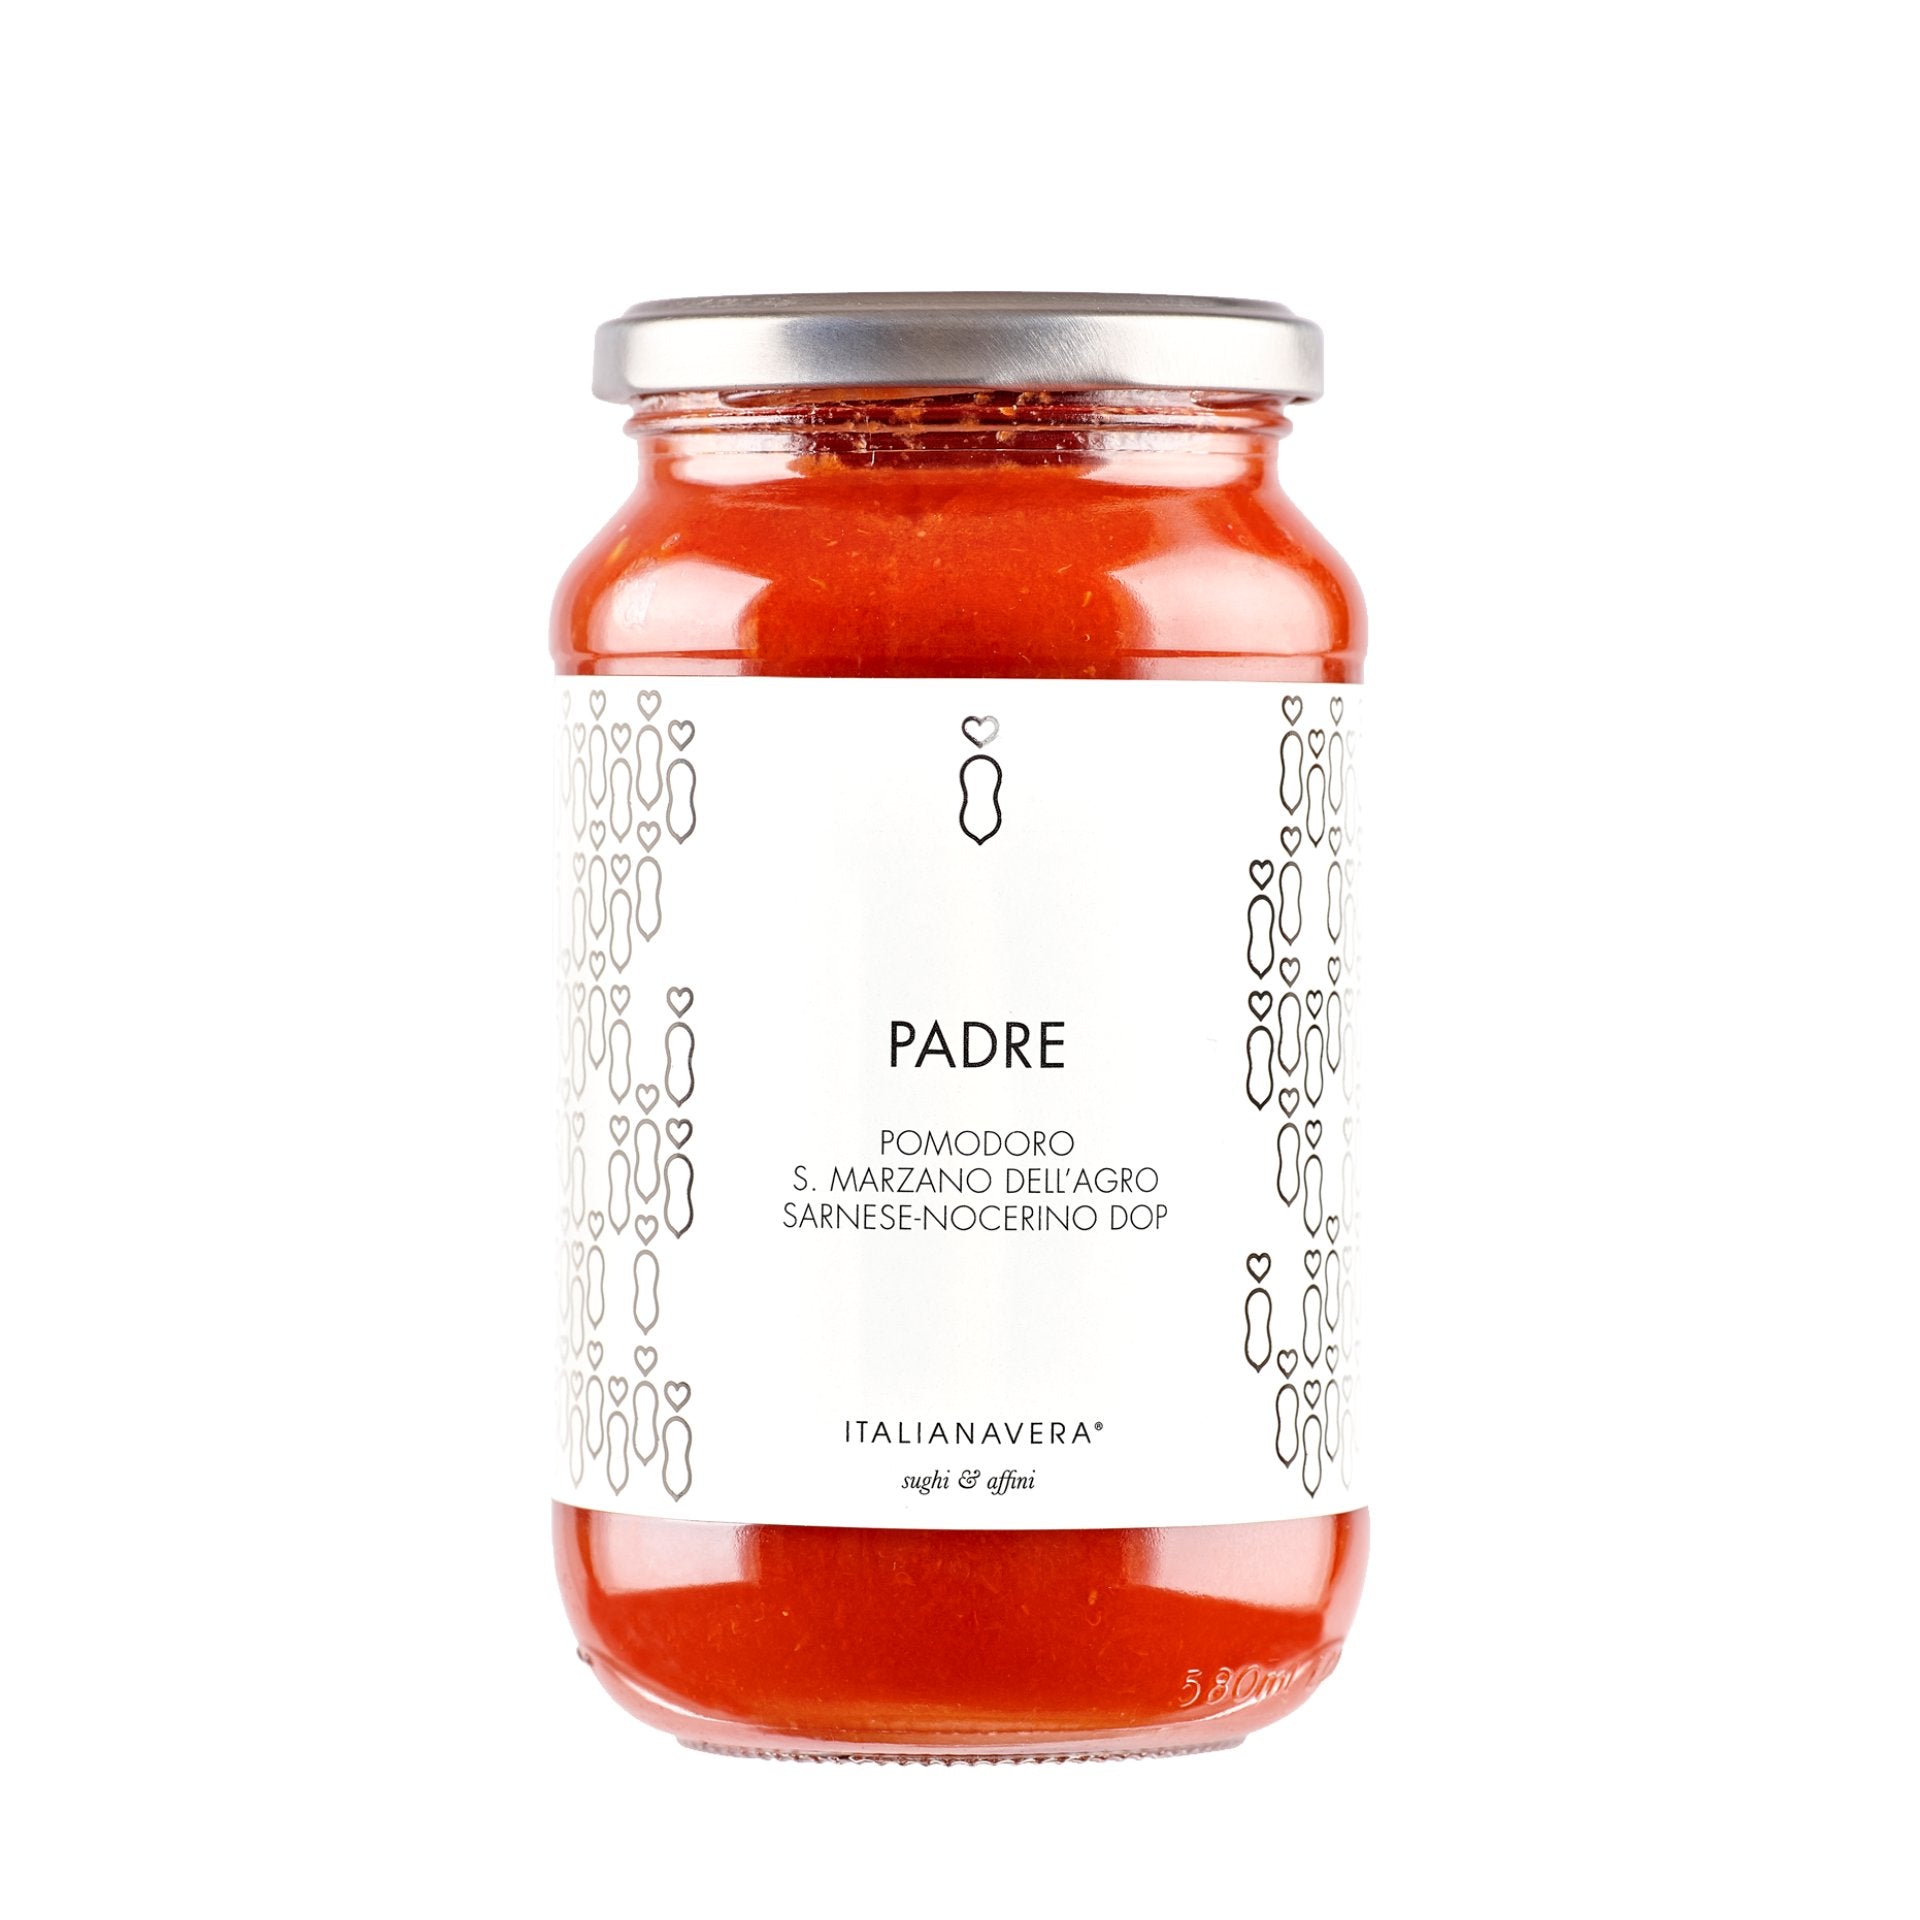 Italianavera Padre San Marzano DOP Tomato 520g (glass jar)  | Imported and distributed in the UK by Just Gourmet Foods